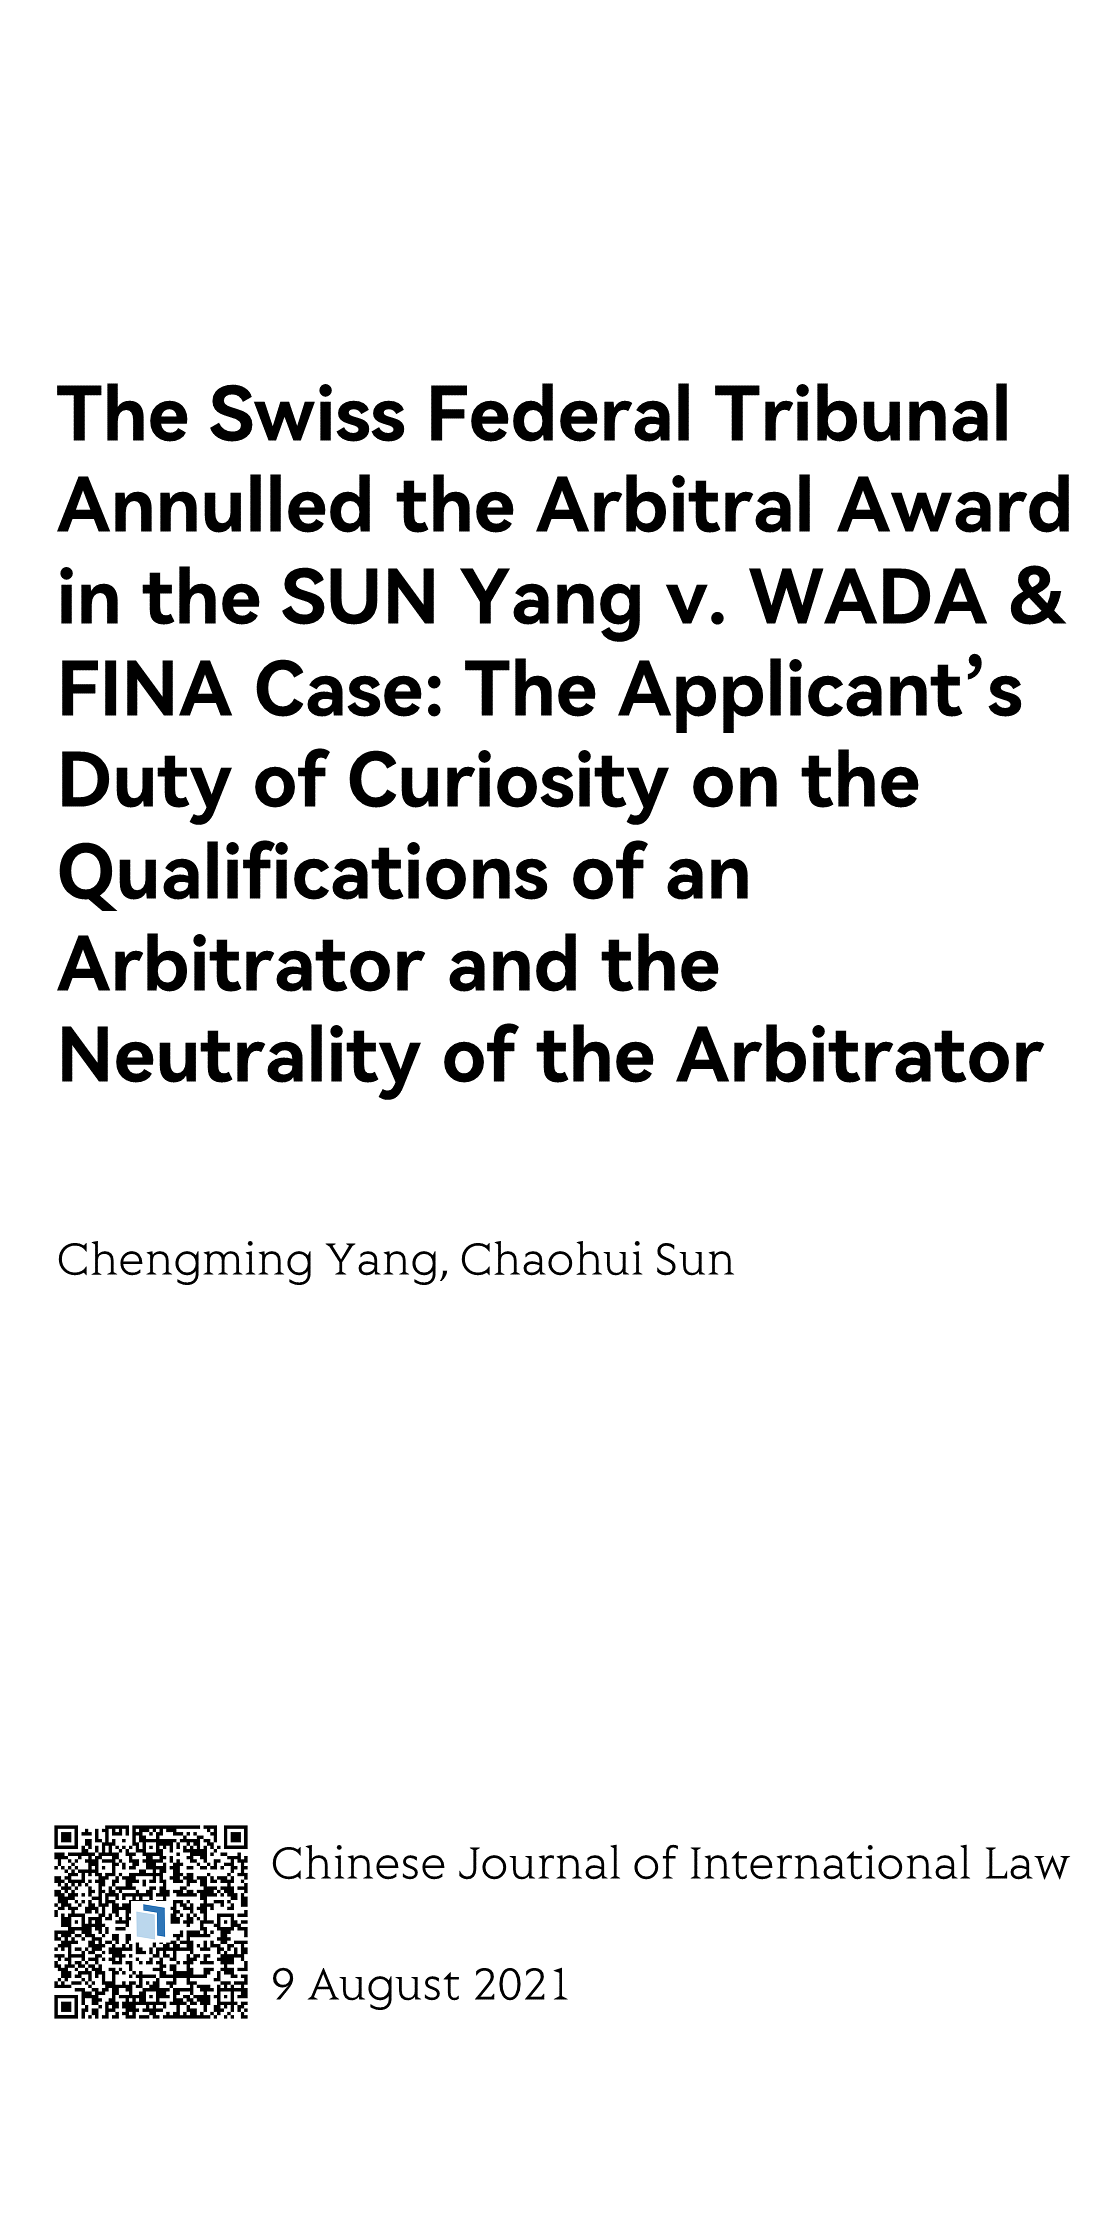 The Swiss Federal Tribunal Annulled the Arbitral Award in the SUN Yang v. WADA & FINA Case: The Applicant's Duty of Curiosity on the Qualifications of an Arbitrator and the Neutrality of the Arbitrator_1